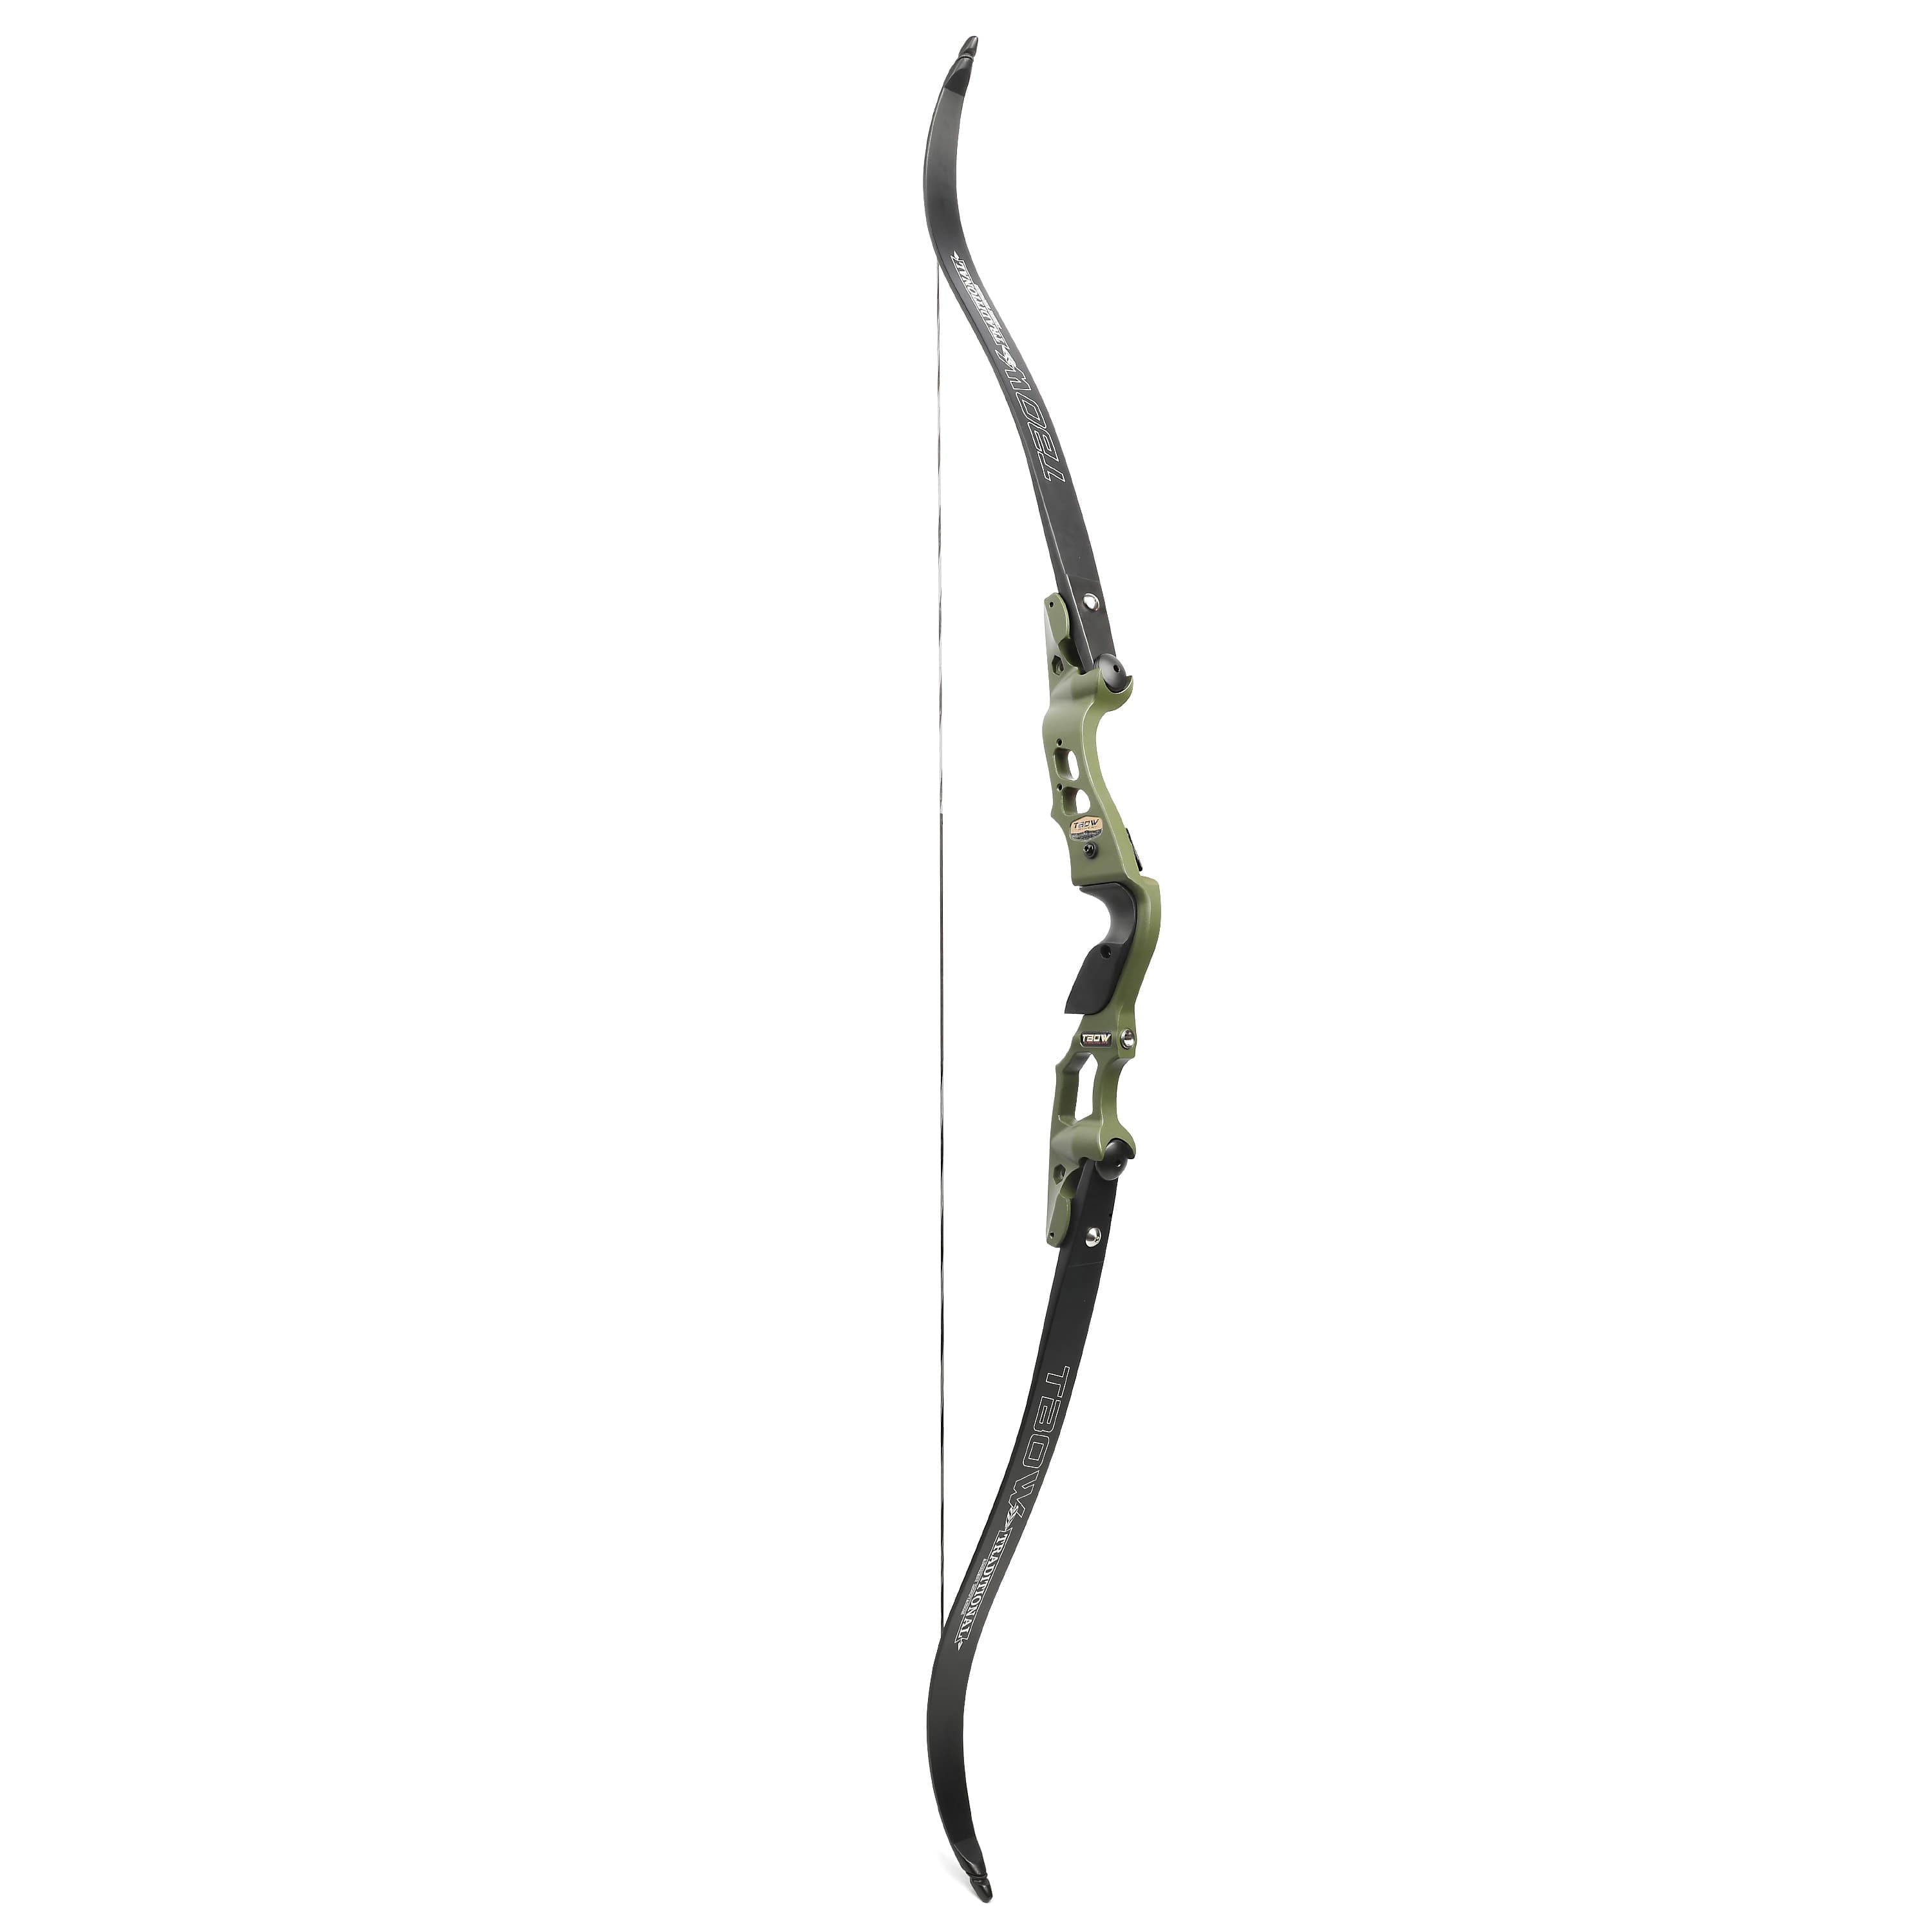  TBOW 62” ILF Recurve Bow with Gordon Limbs 30-50Lbs for Adult  Archery Competition Athletic Right Hand (30Lbs) : Sports & Outdoors